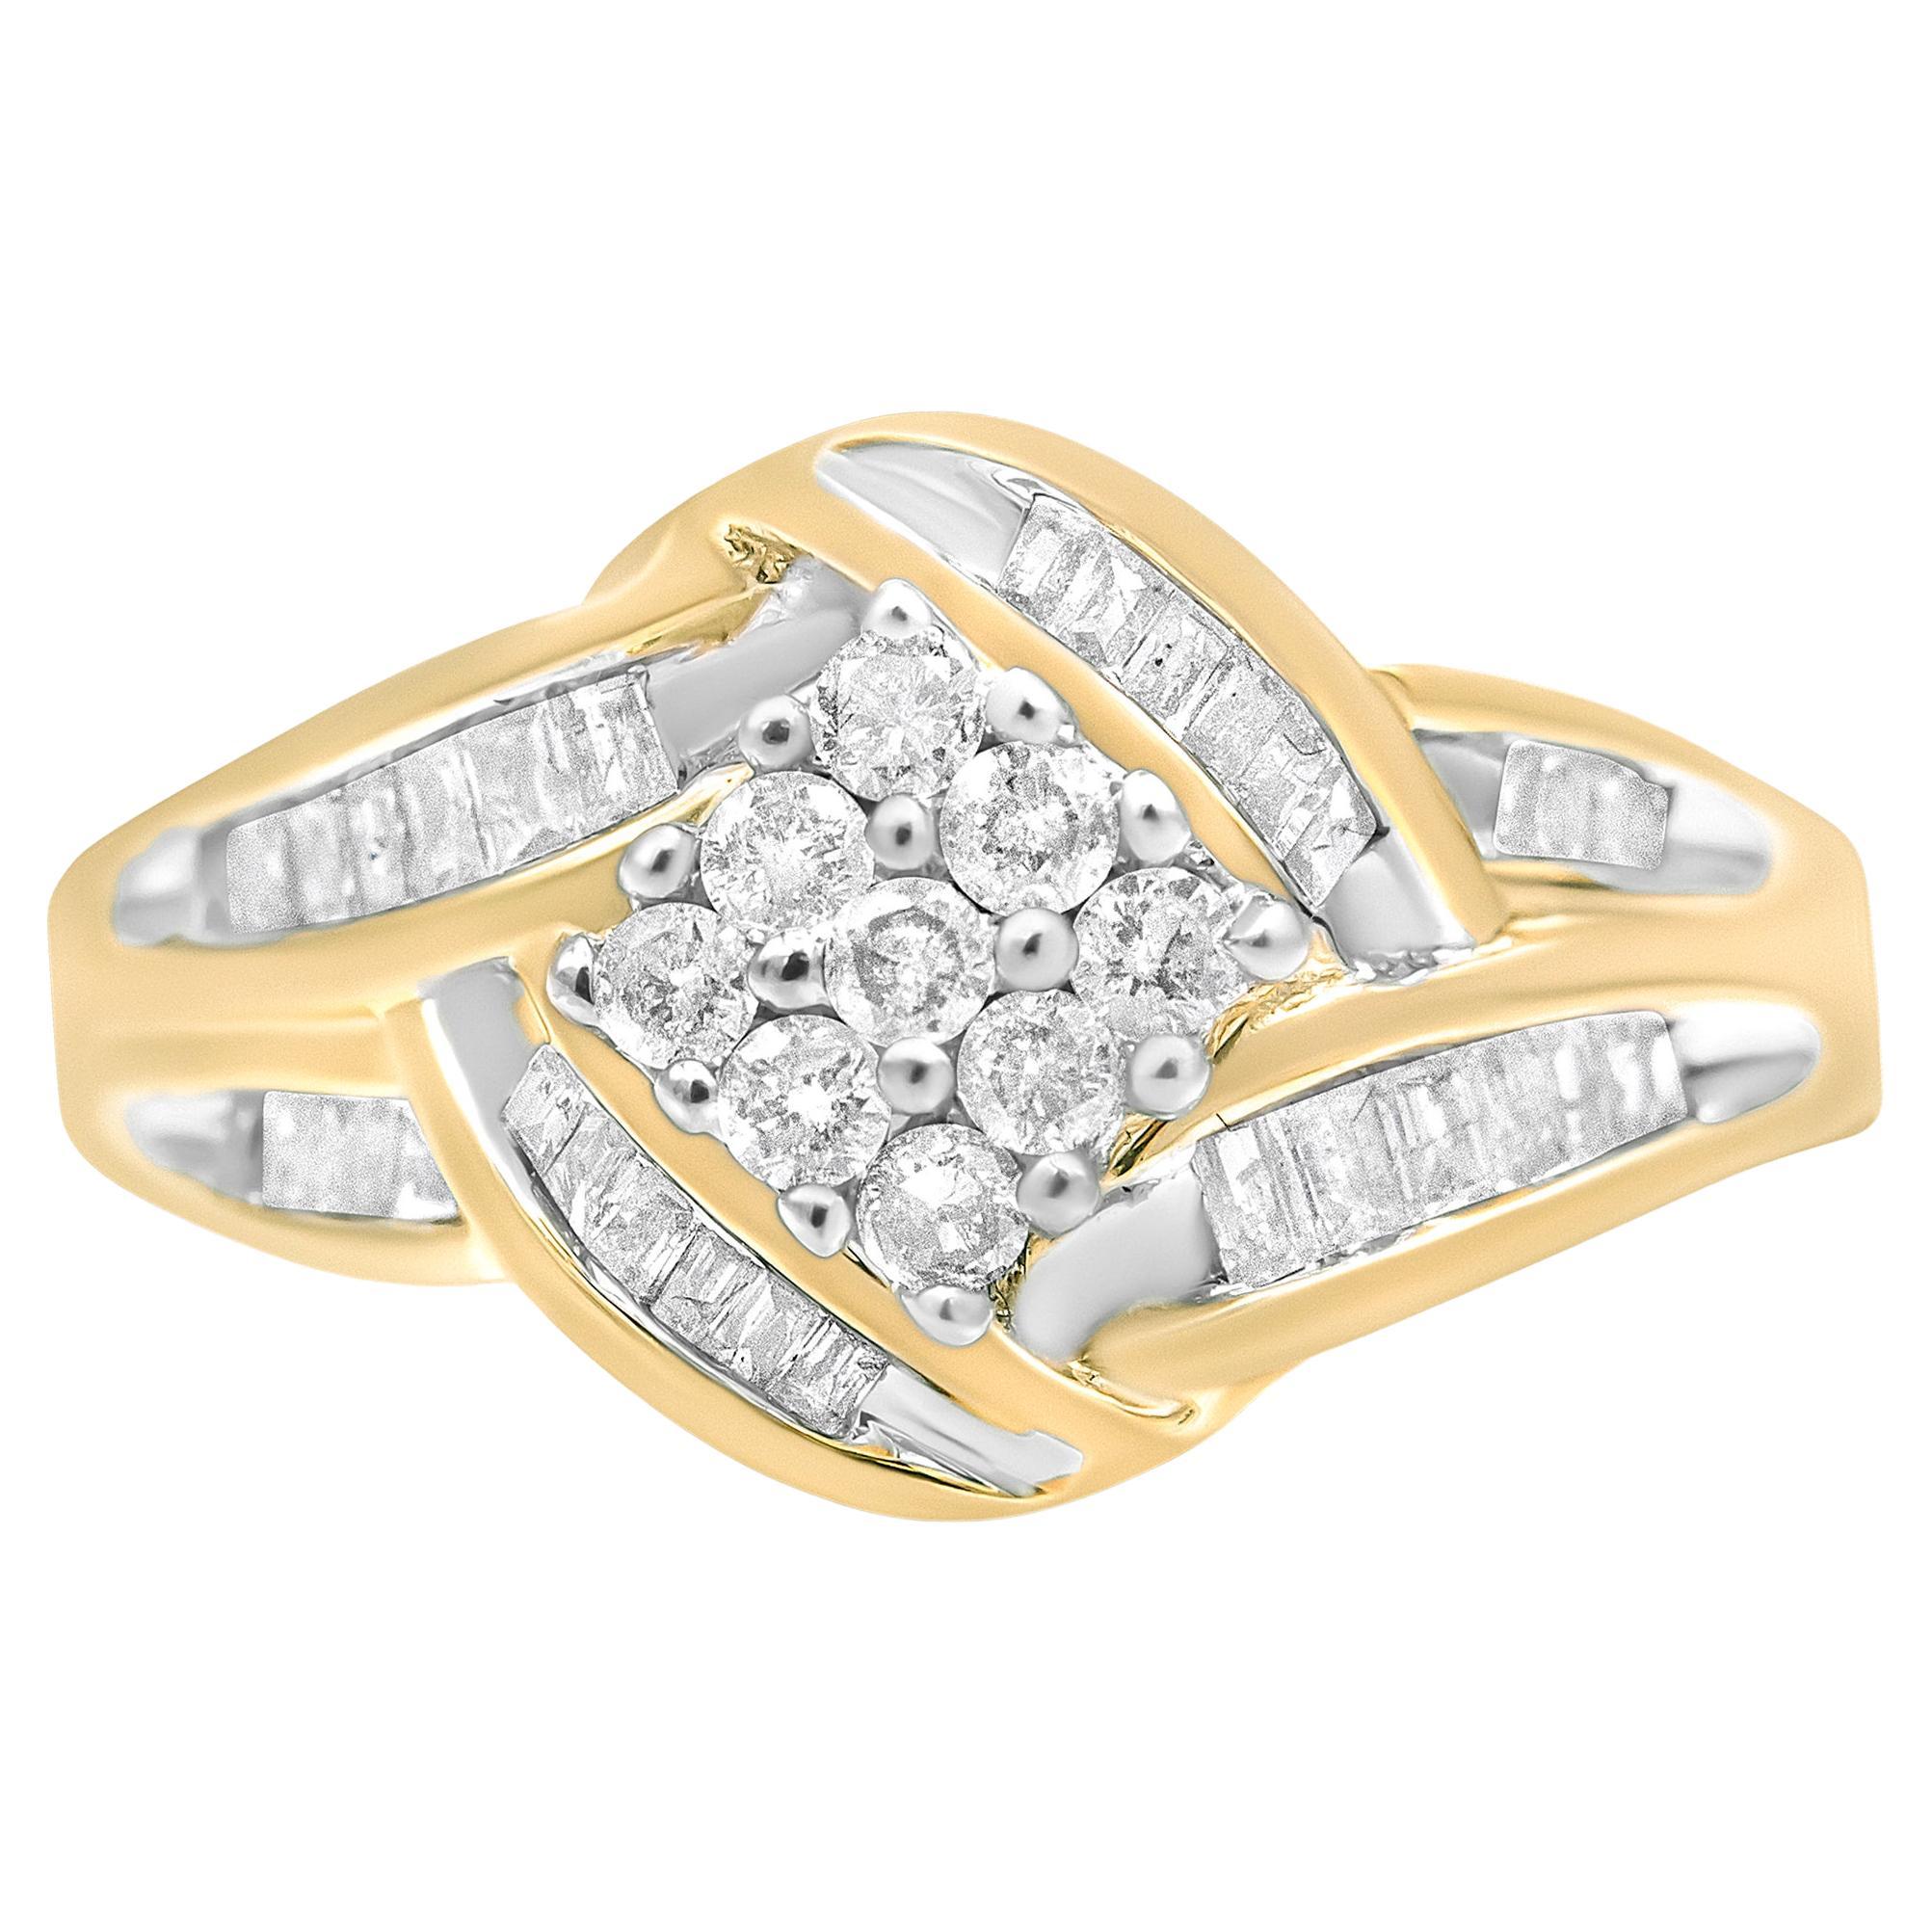 10K Yellow and White Gold 3/4 Carat Diamond Cluster and Swirl Ring